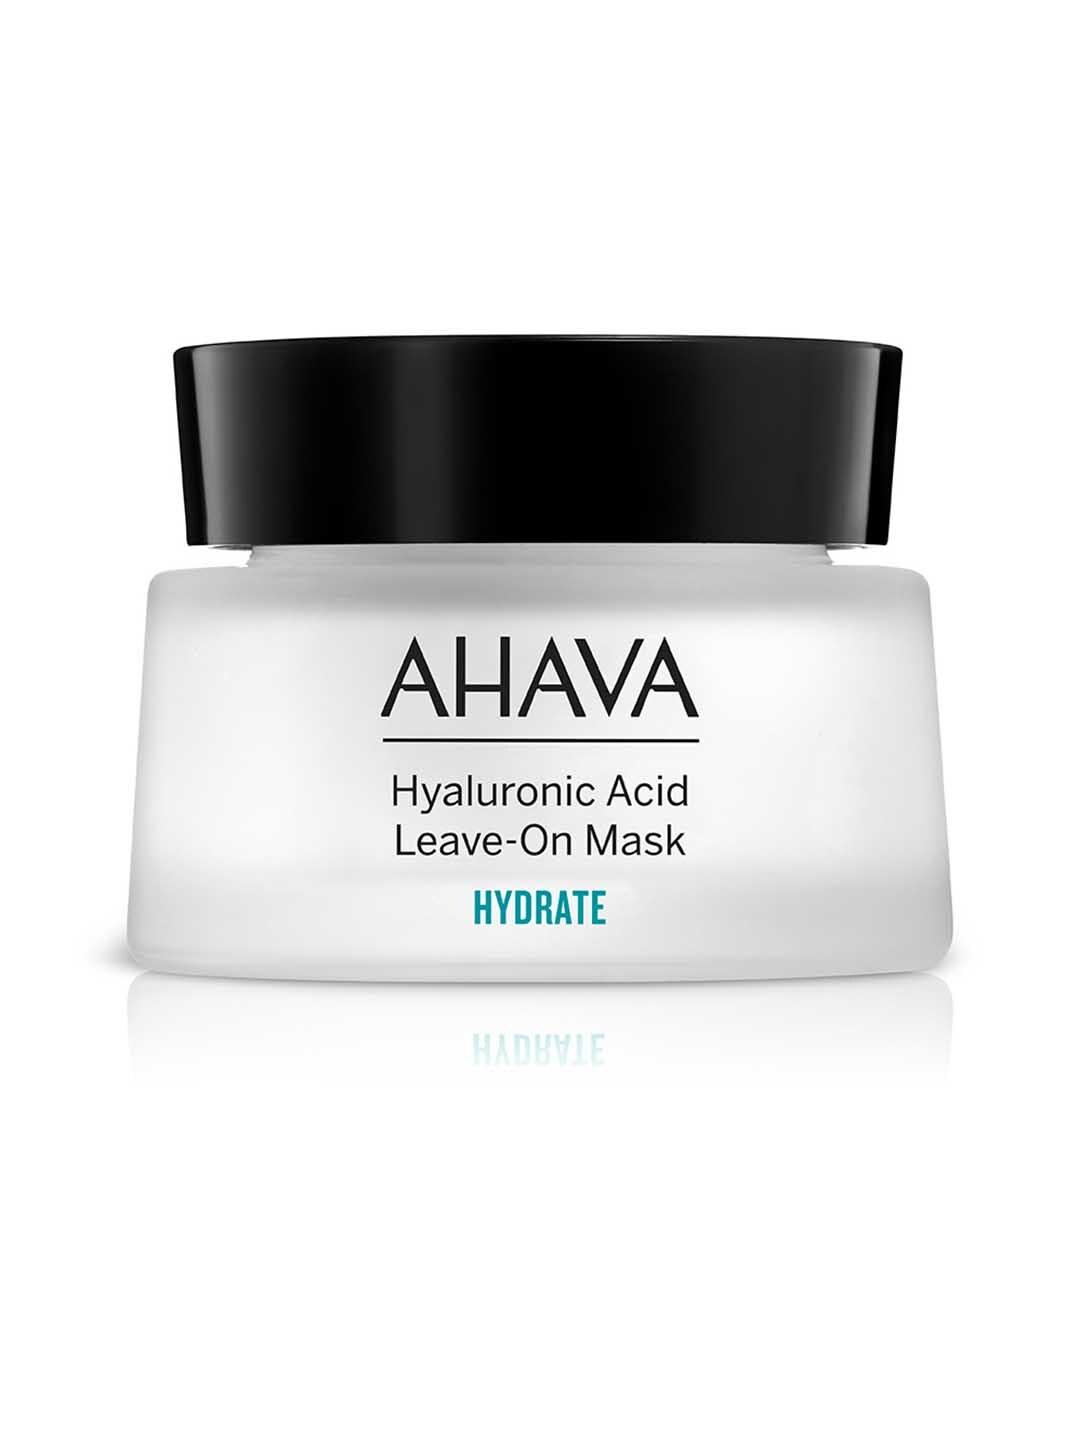 AHAVA Hyaluronic Acid Leave-On Mask with Dead Sea Minerals - 50ml